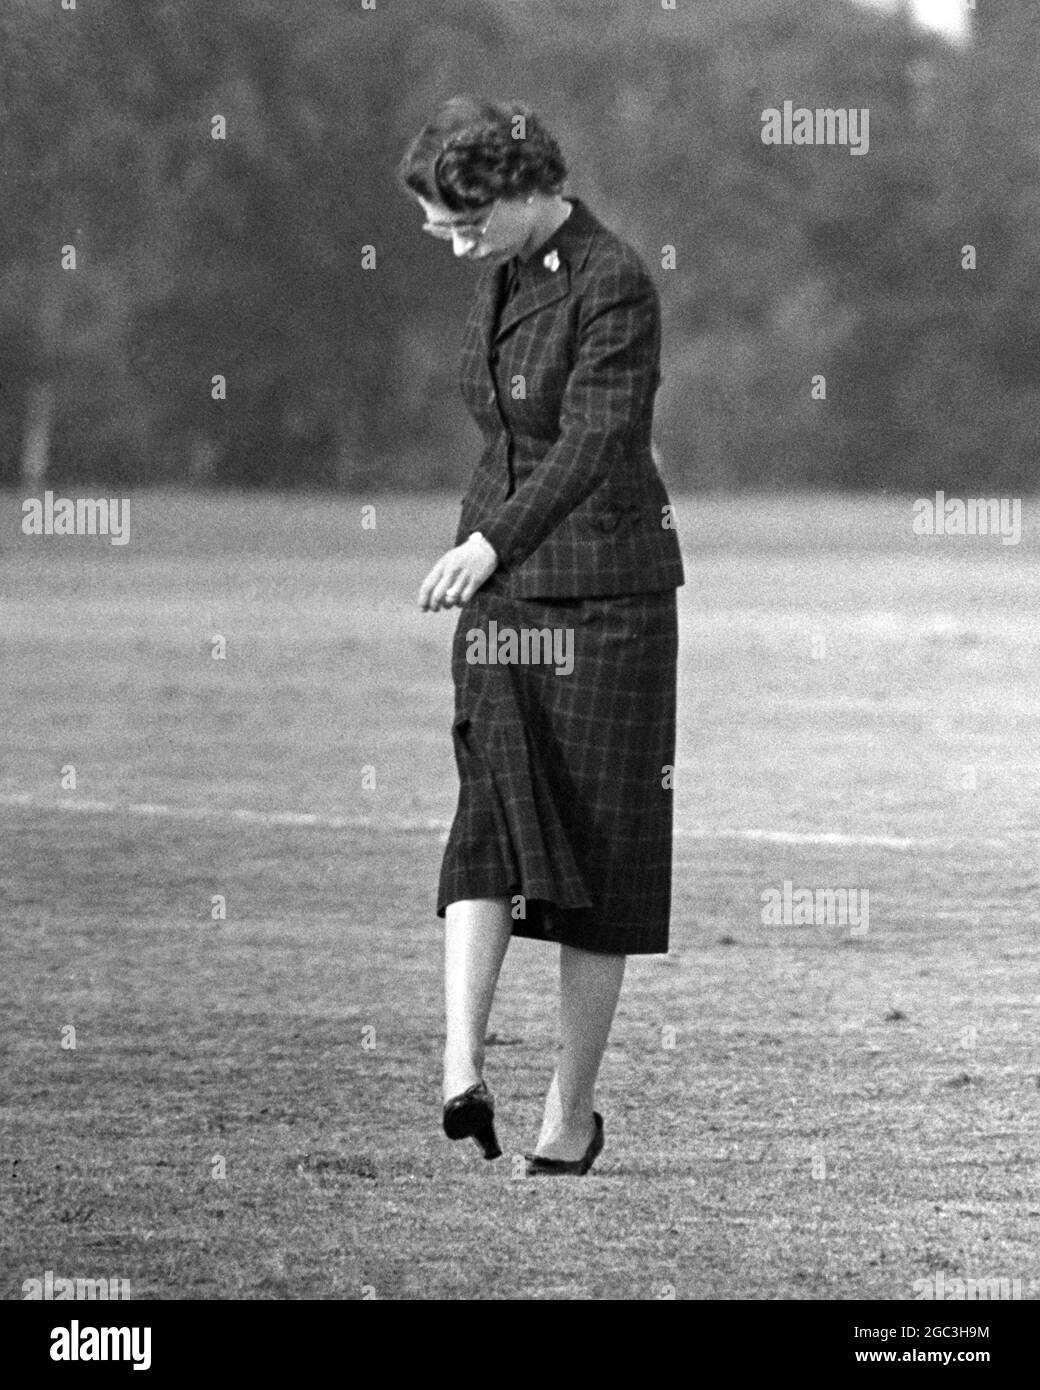 Queen Stamps Down Divots Her Majesty The Queen joins spectators in stamping down holes in the pitch after the Household Brigade Polo Match during the Ascot Week Tournament on Smiths Lawn, Windsor Great Park. 13th June 1955 Stock Photo